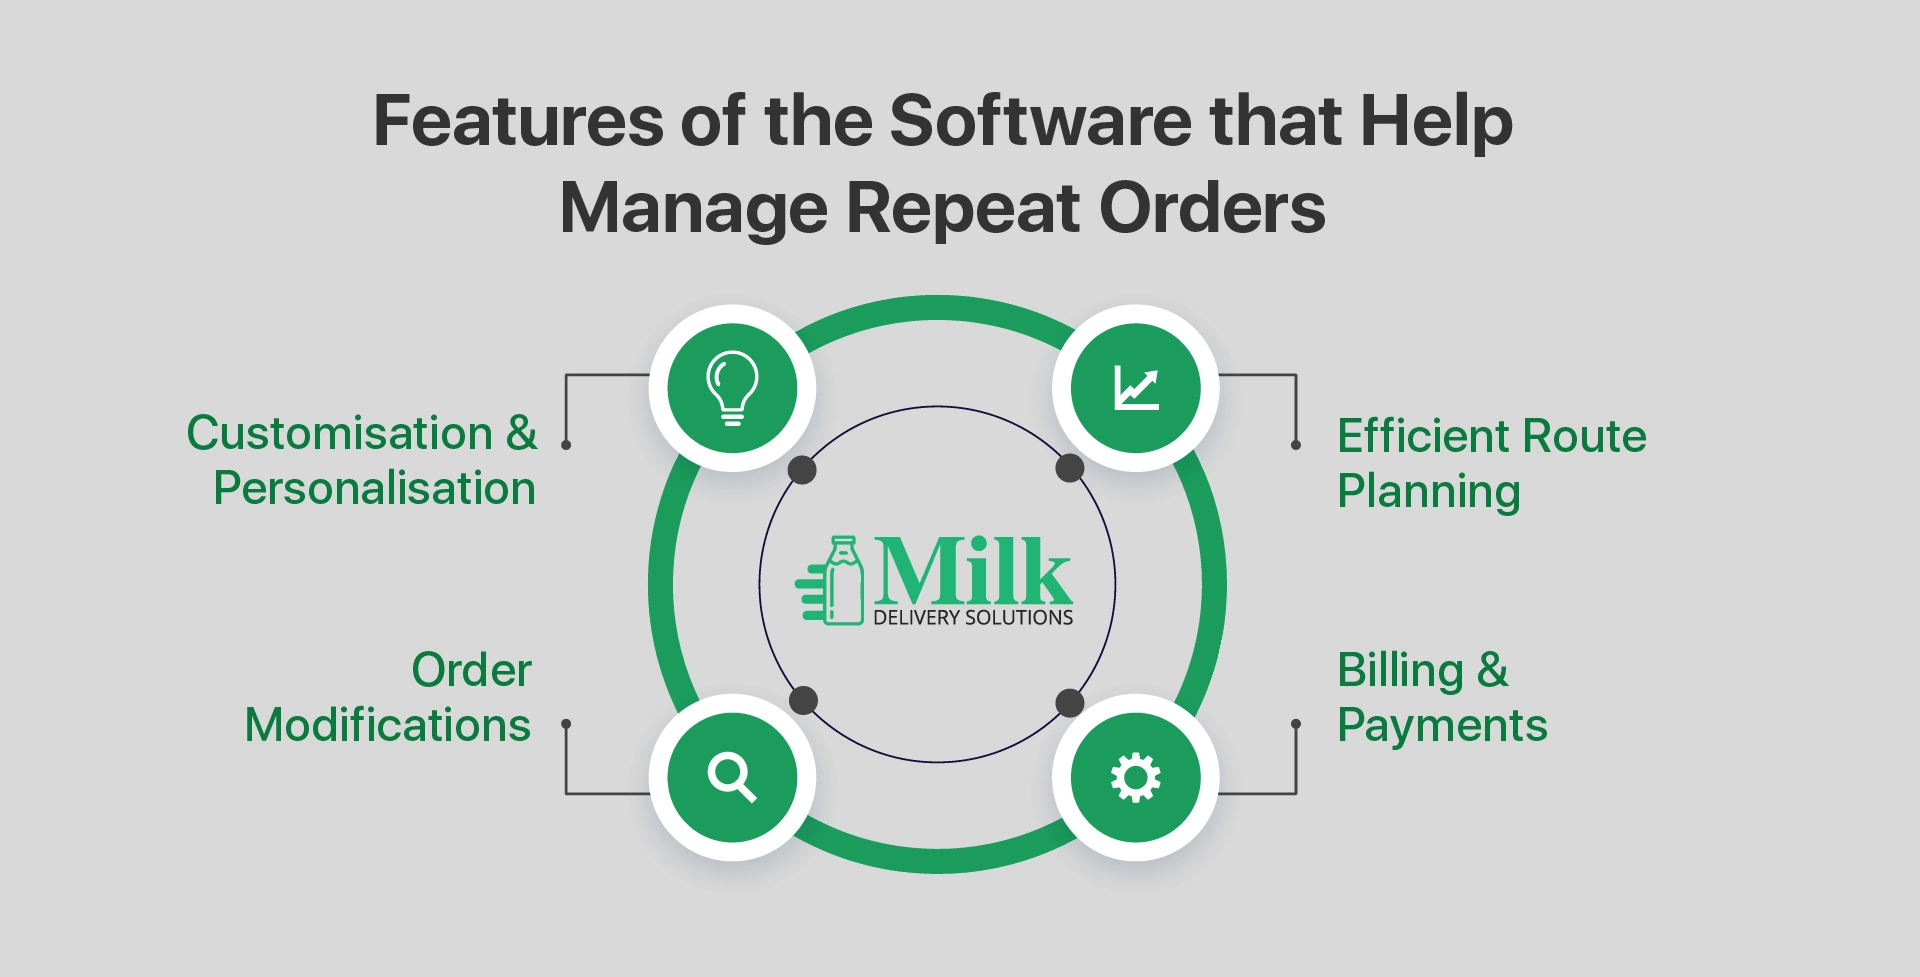 ravi garg, mds, features, milk delivery solutions, repeat orders, customisation, personalisation, route planning, order modification, billing, payments